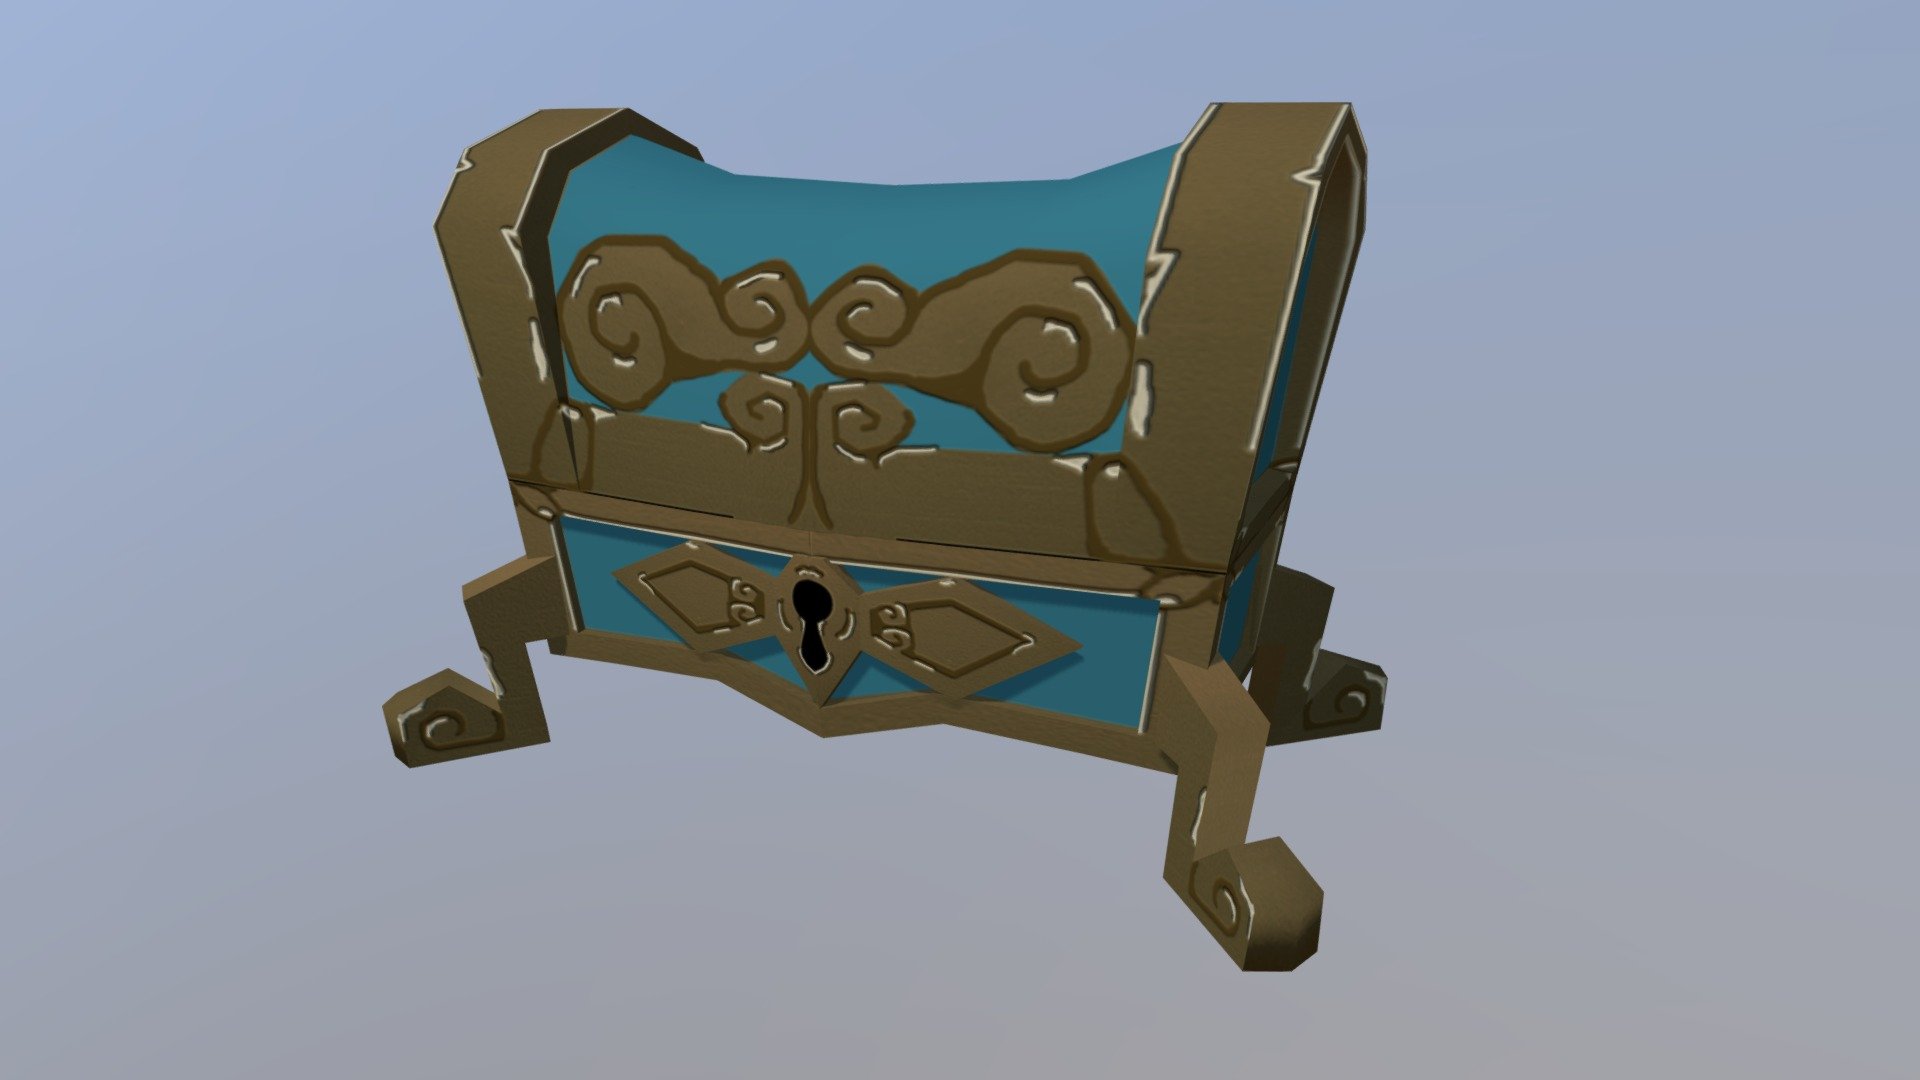 Fan-made model of the Legend of Zelda Wind Waker's chest design.

Model and texture made by me, based on reference photos 3d model